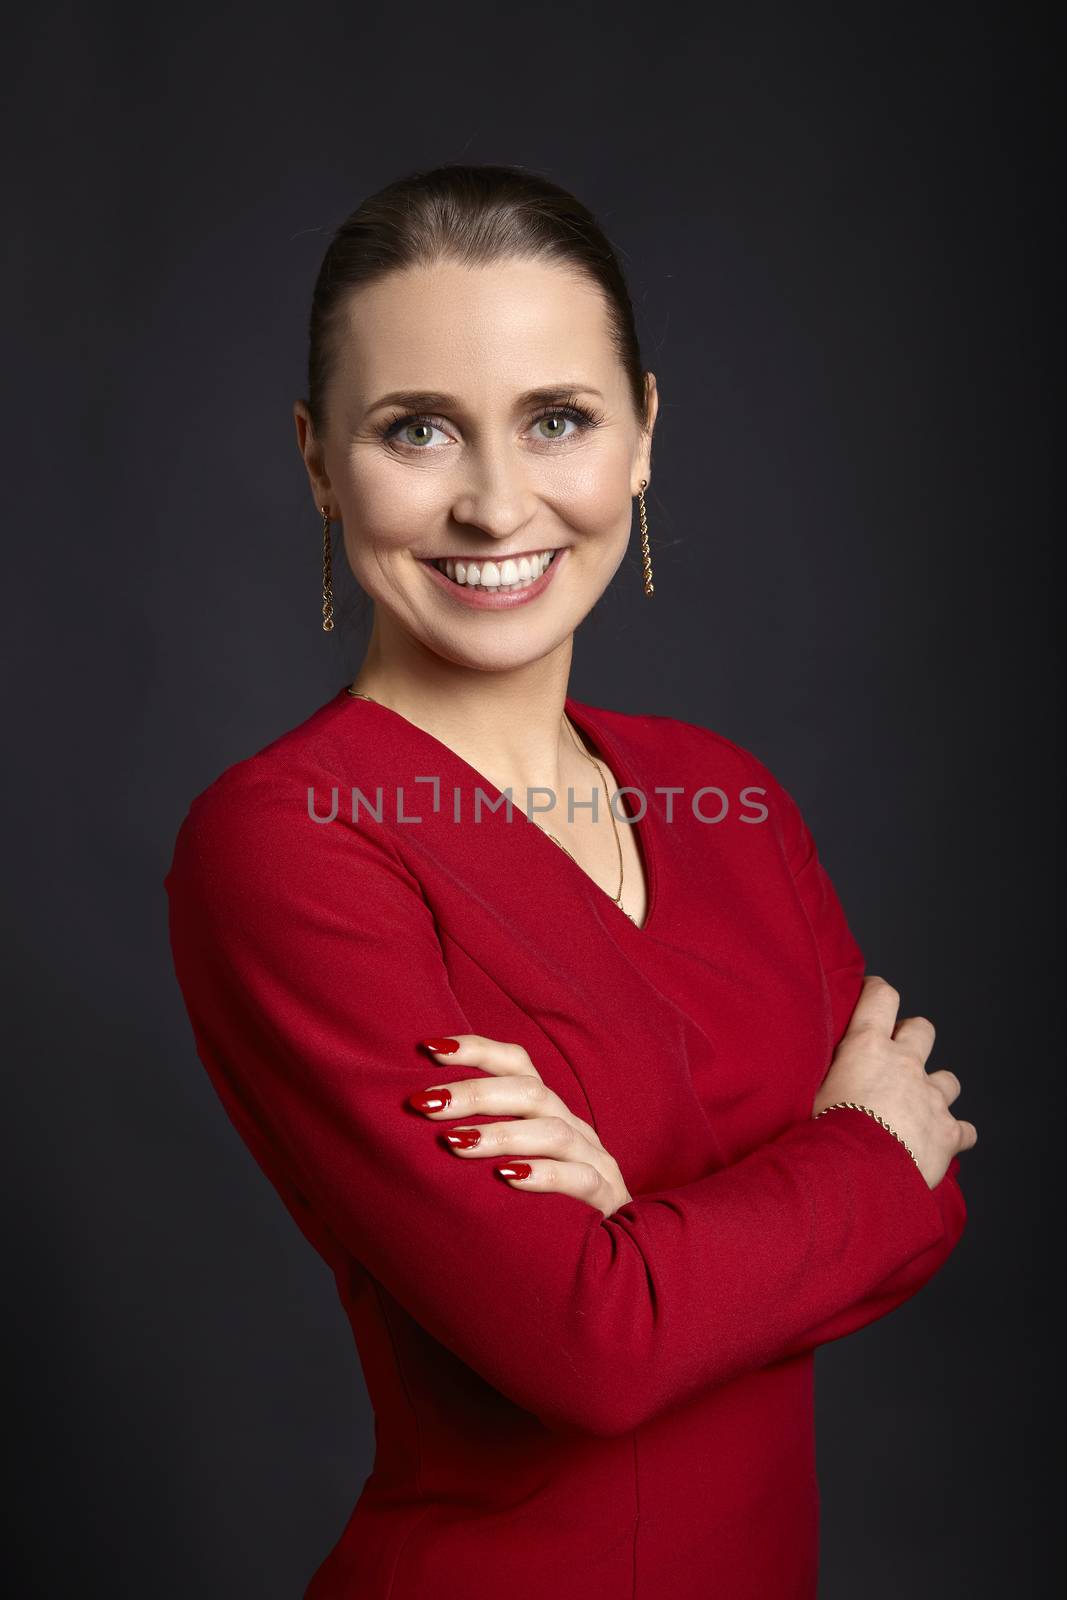 Studio shot of young woman with white smile and crossed arms on black background.